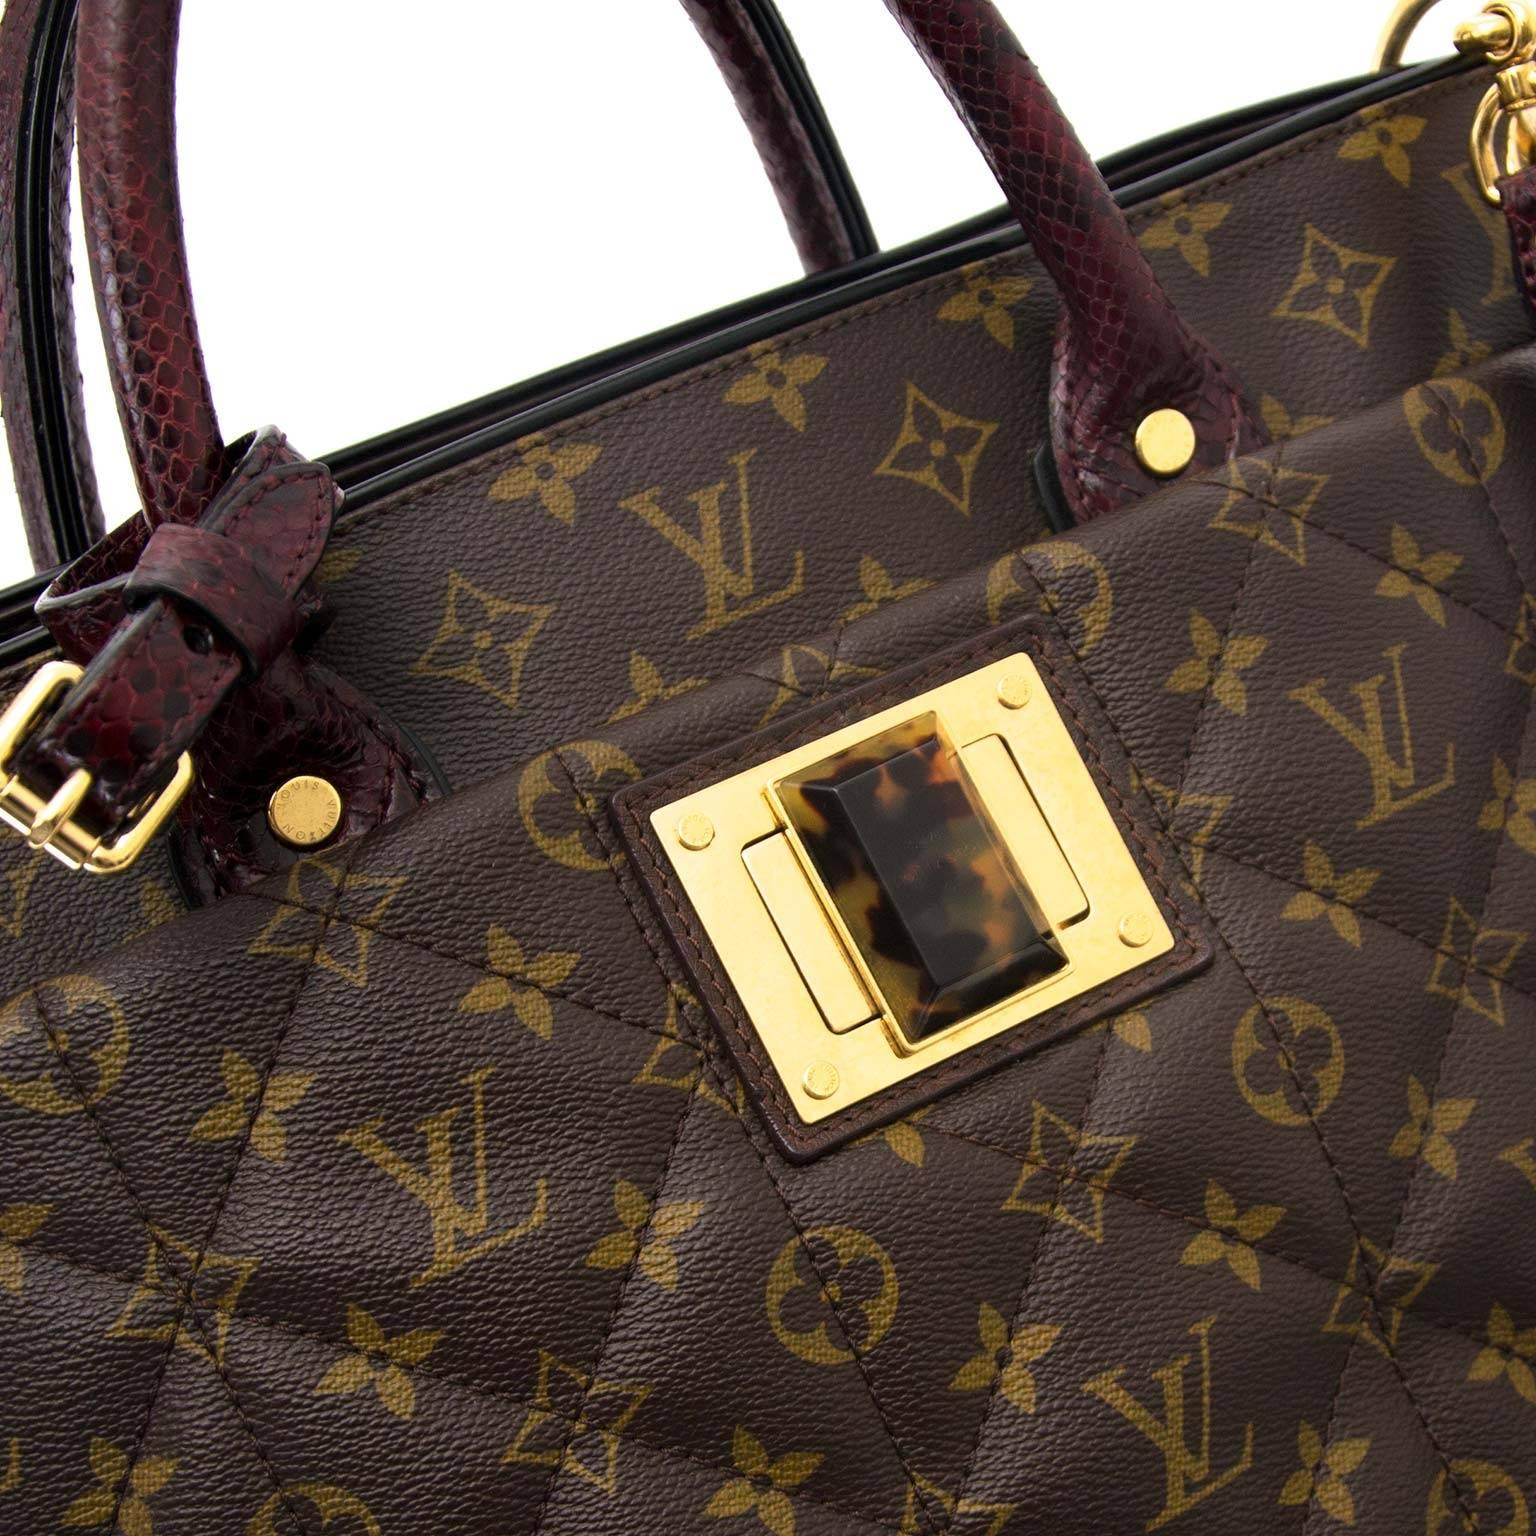 Pristine Condition
Louis Vuitton Monogram Etoile Exotique GM Tote Bag

A rich blend of exquisite textures and details, this Limited Louis VUitton Etoile Exotique tote GM is truly luxurious.
Fine craftsmanship has created this stunning tote with